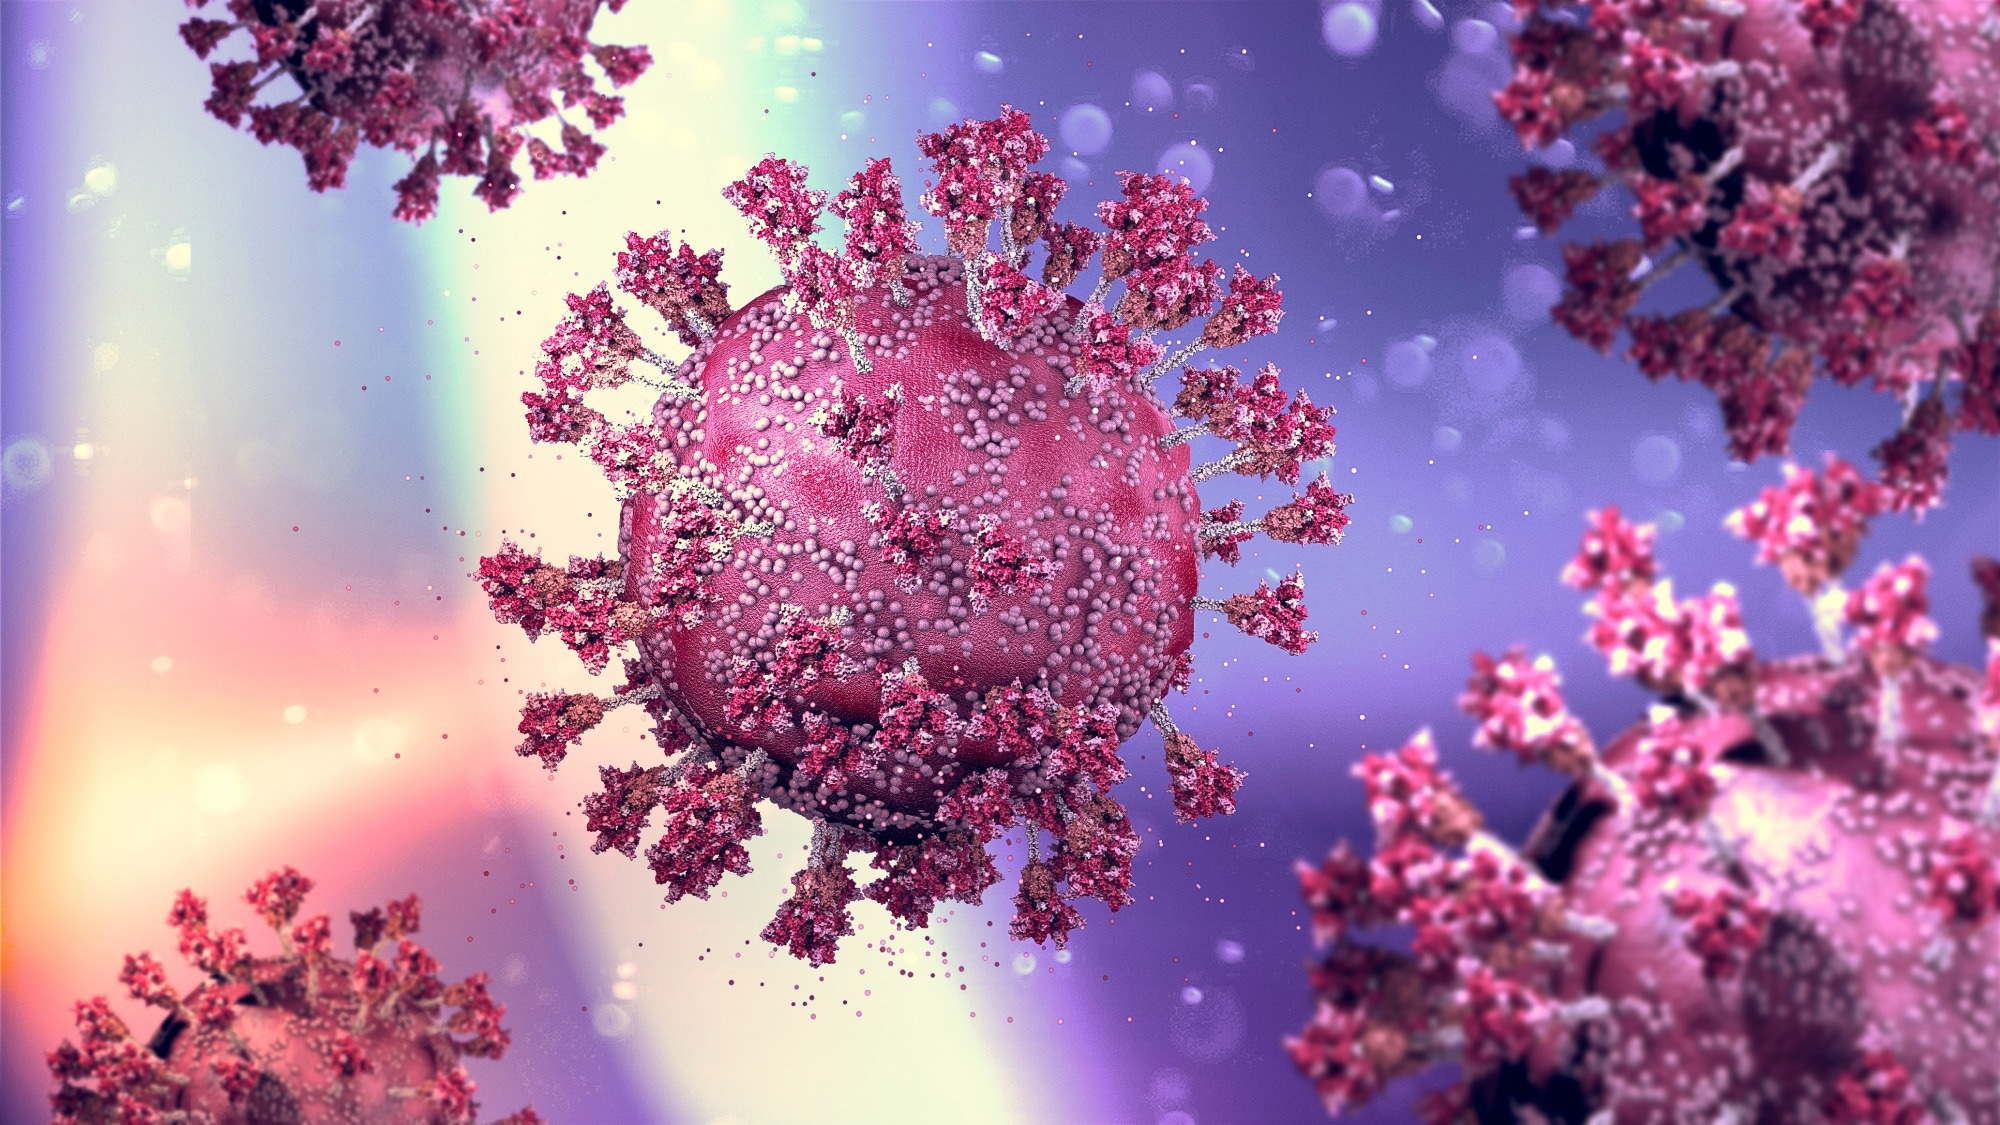 Study: SARS-CoV-2 antibodies and breakthrough infections in the Virus Watch cohort. Image Credit: Naeblys/Shutterstock